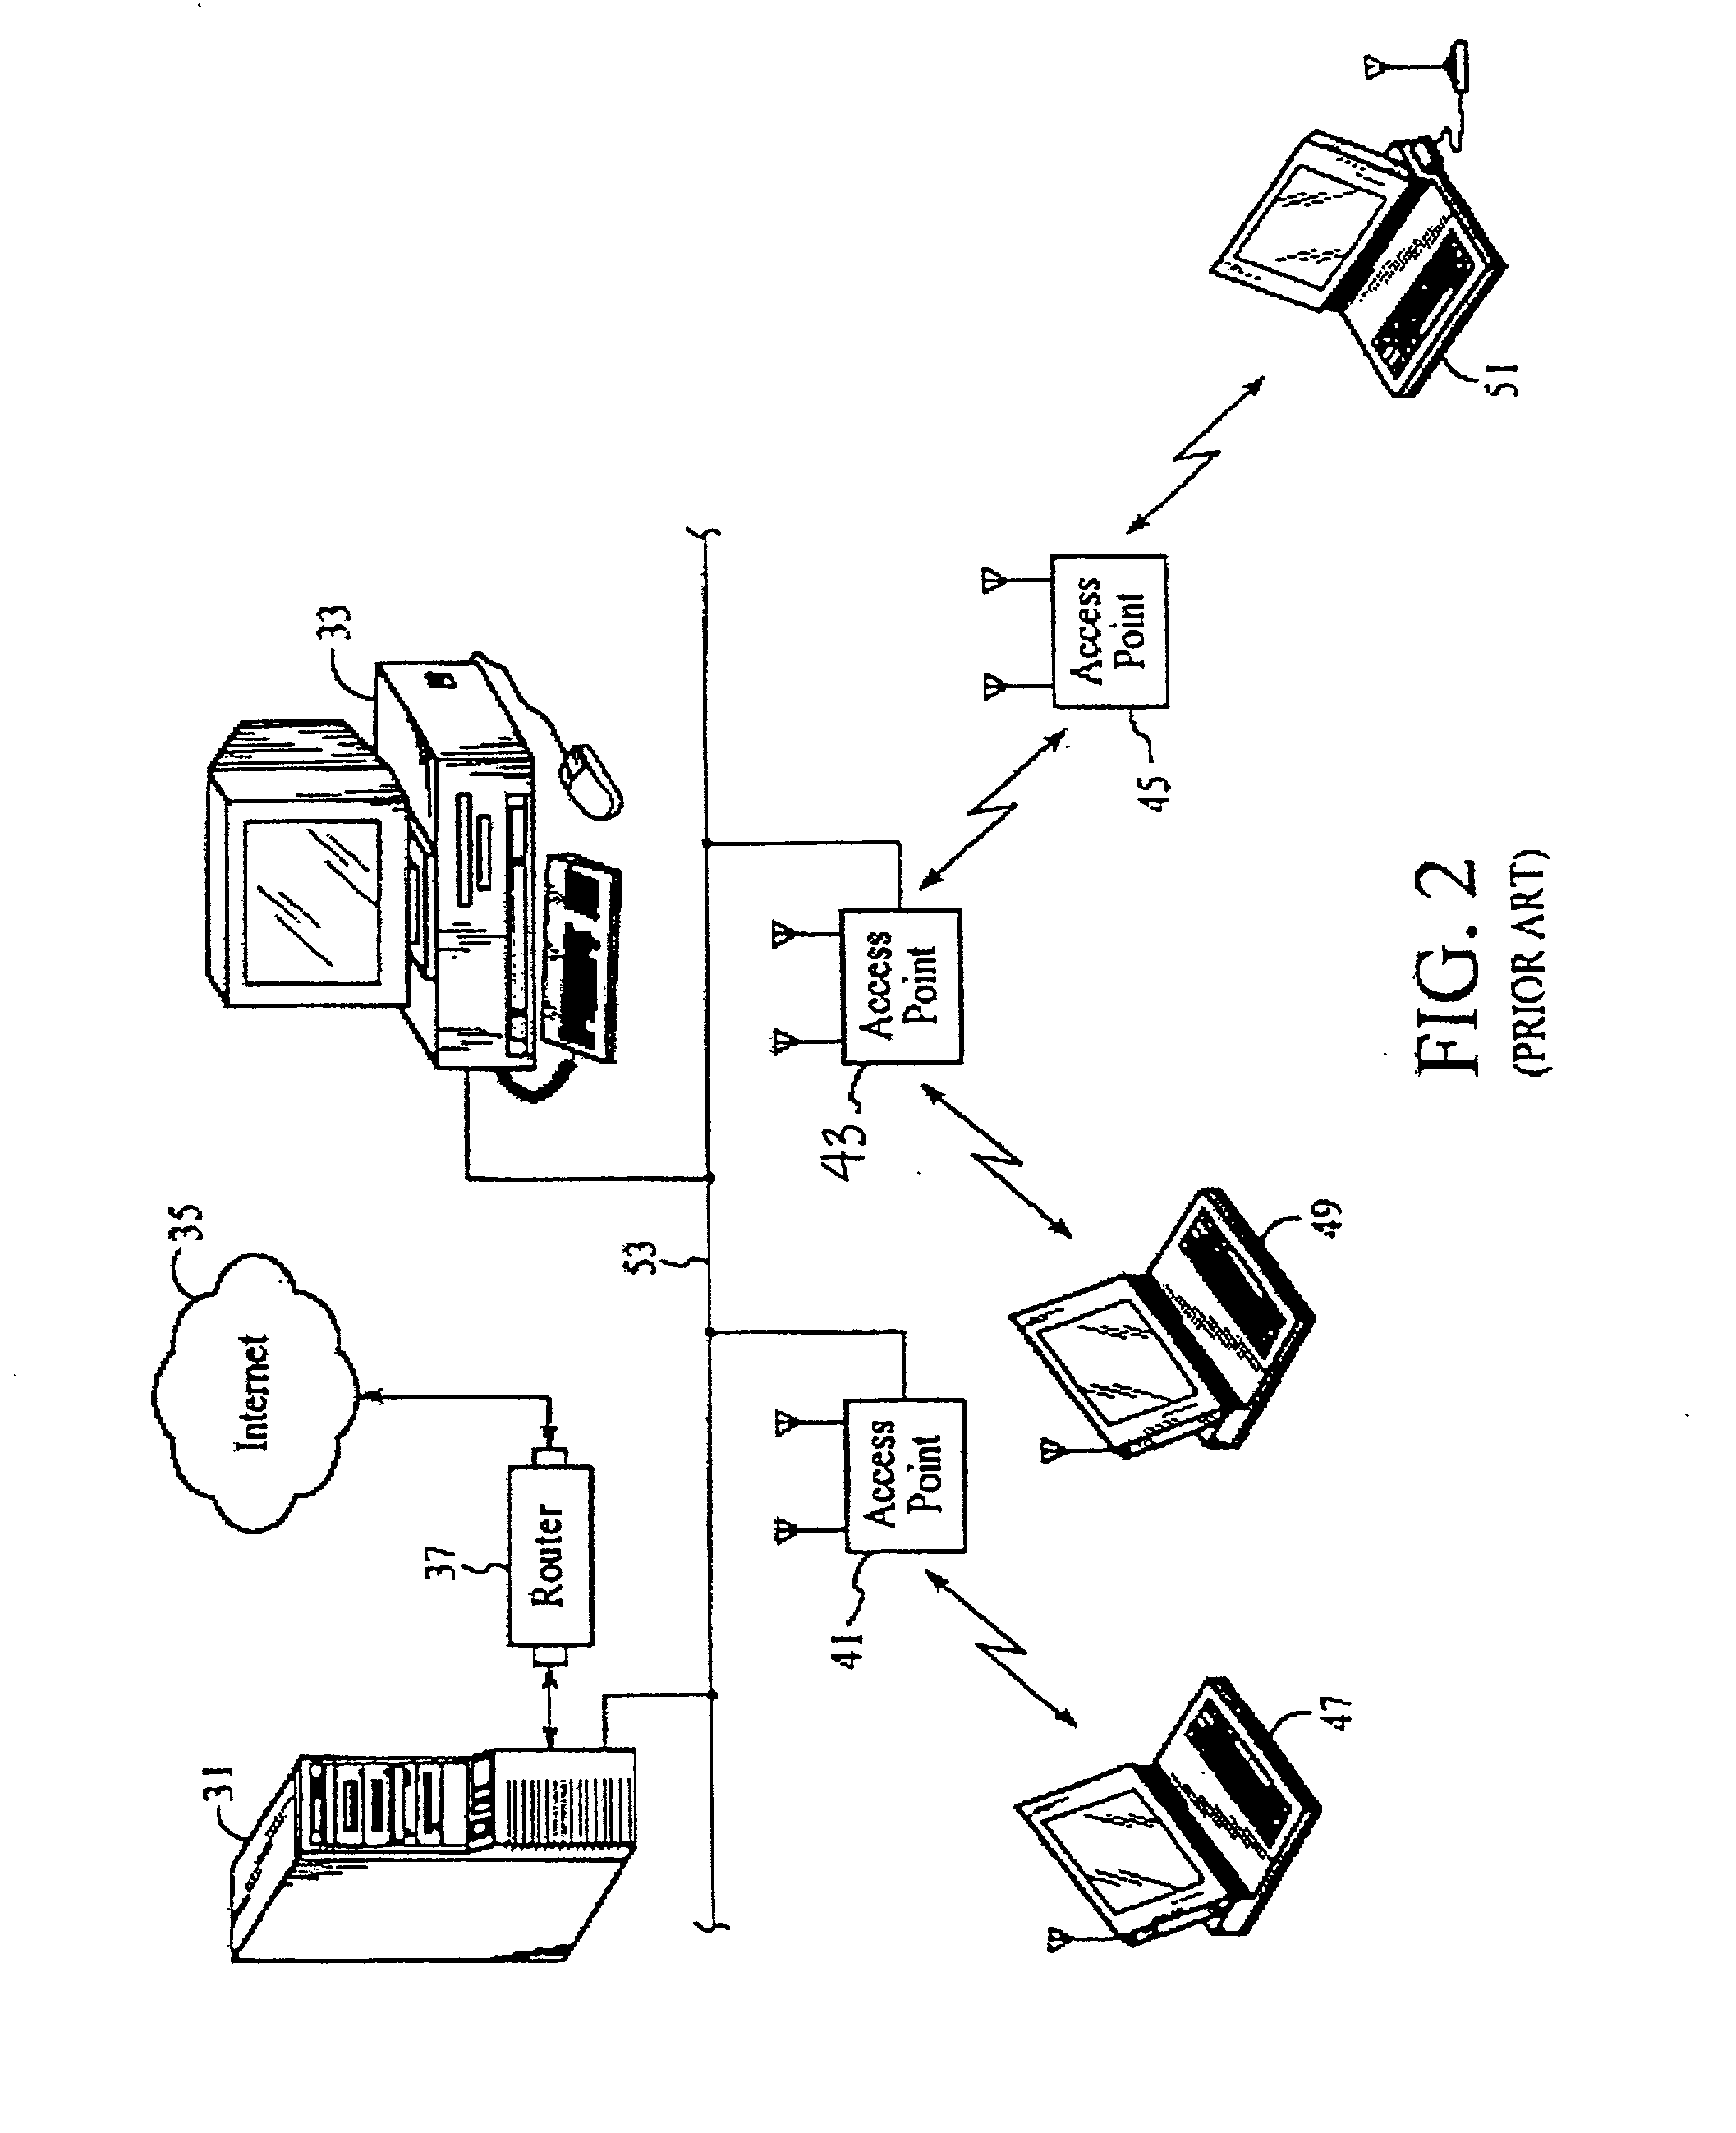 Automated updating of access points in a distributed network